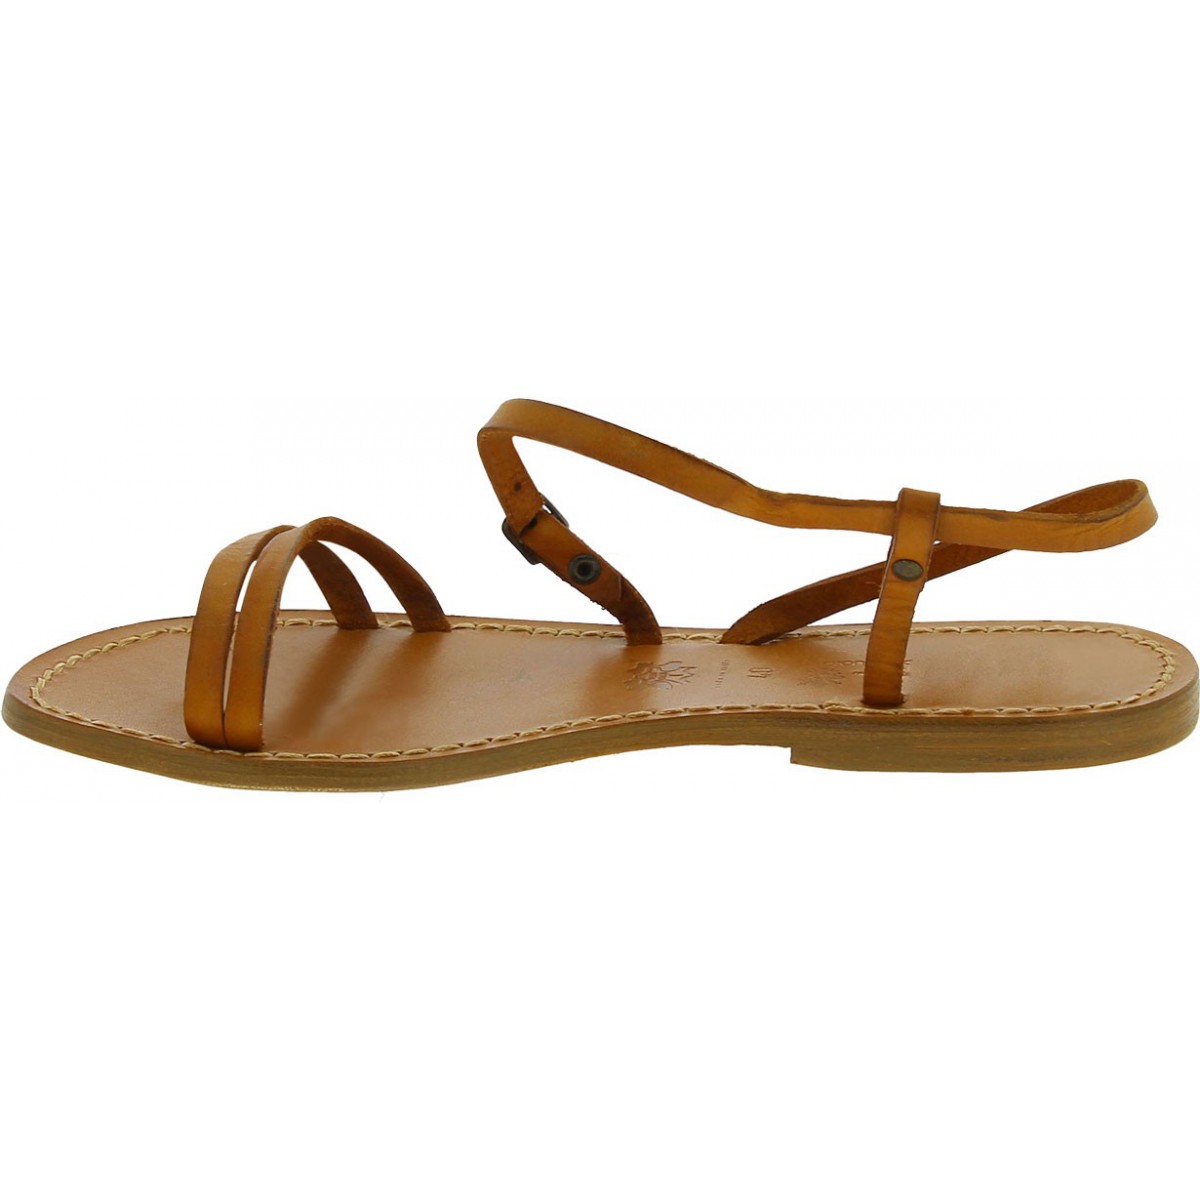 Handmade tan flat sandals for women | The leather craftsmen